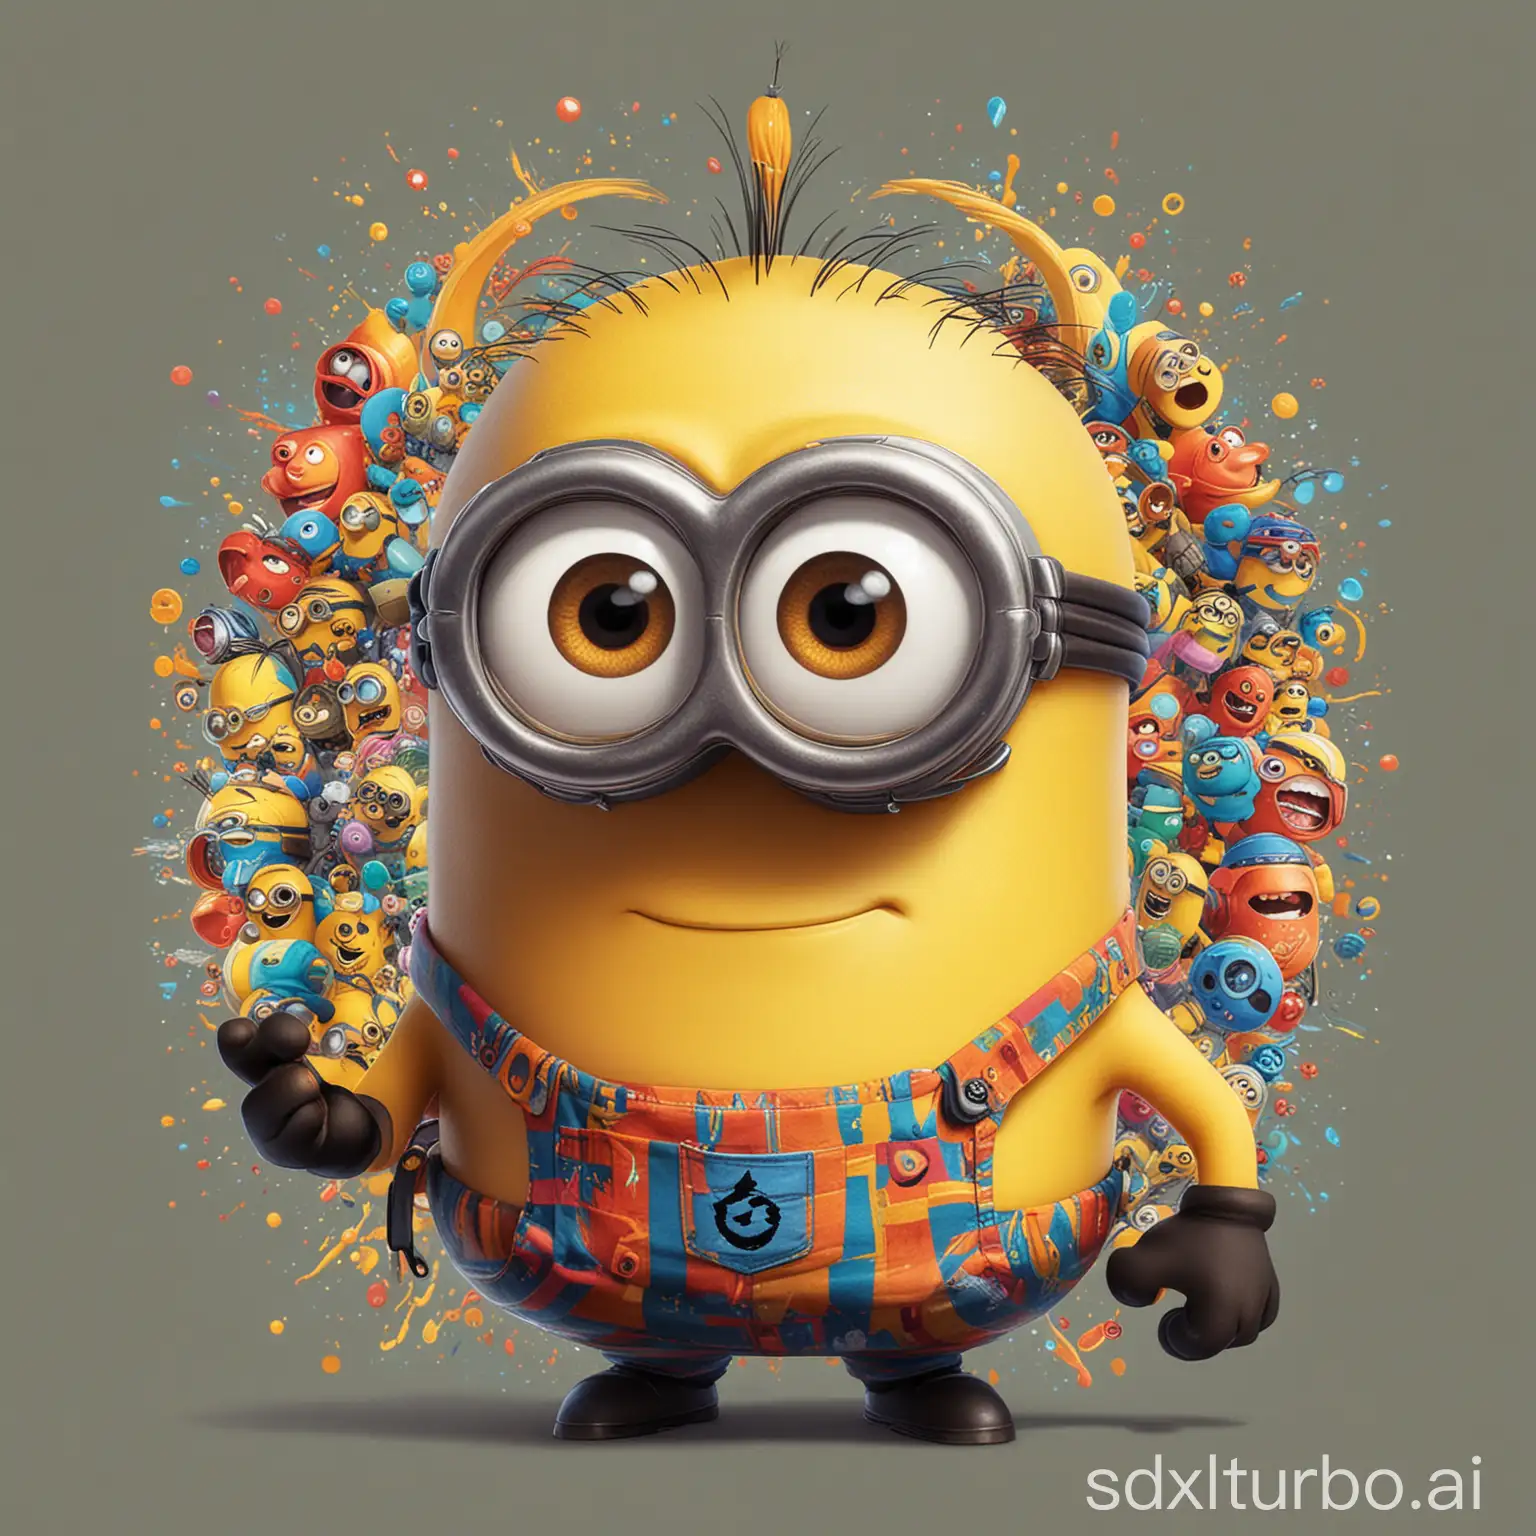 A minion with a defiant attitude wears a "去你的!" t-shirt in this digital painting. The minion's bright colors and bold graphic design grab attention, contrasting with its mischievous expression. The intricate details and vibrant hues showcase the image's whimsy and charm, as the animation highlights the minion's exaggerated features. 